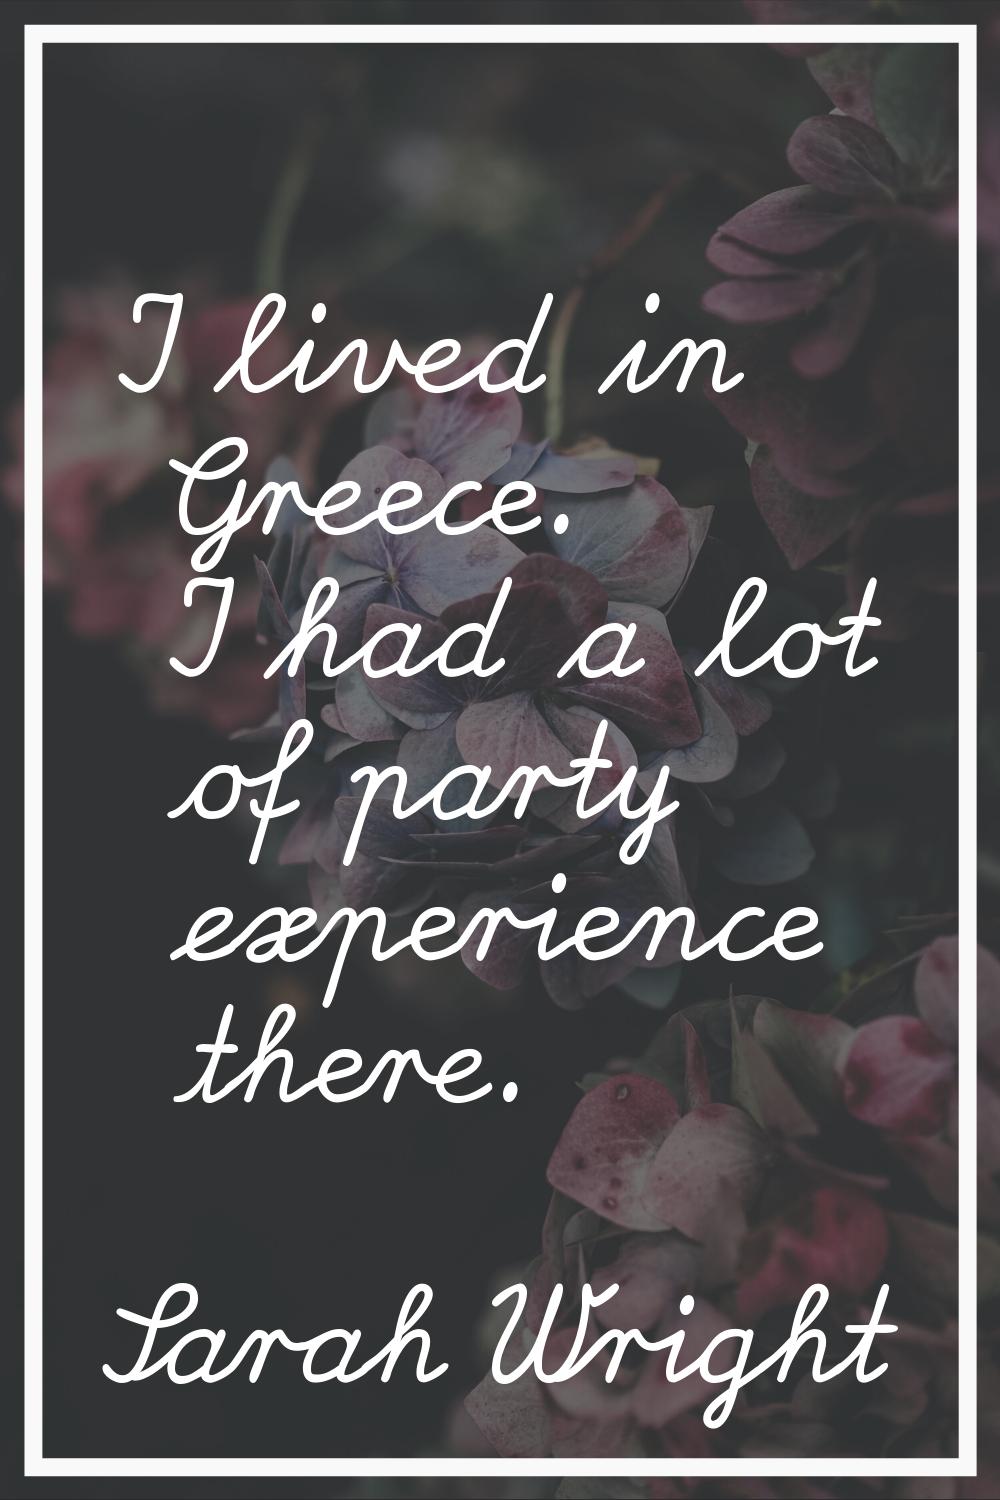 I lived in Greece. I had a lot of party experience there.